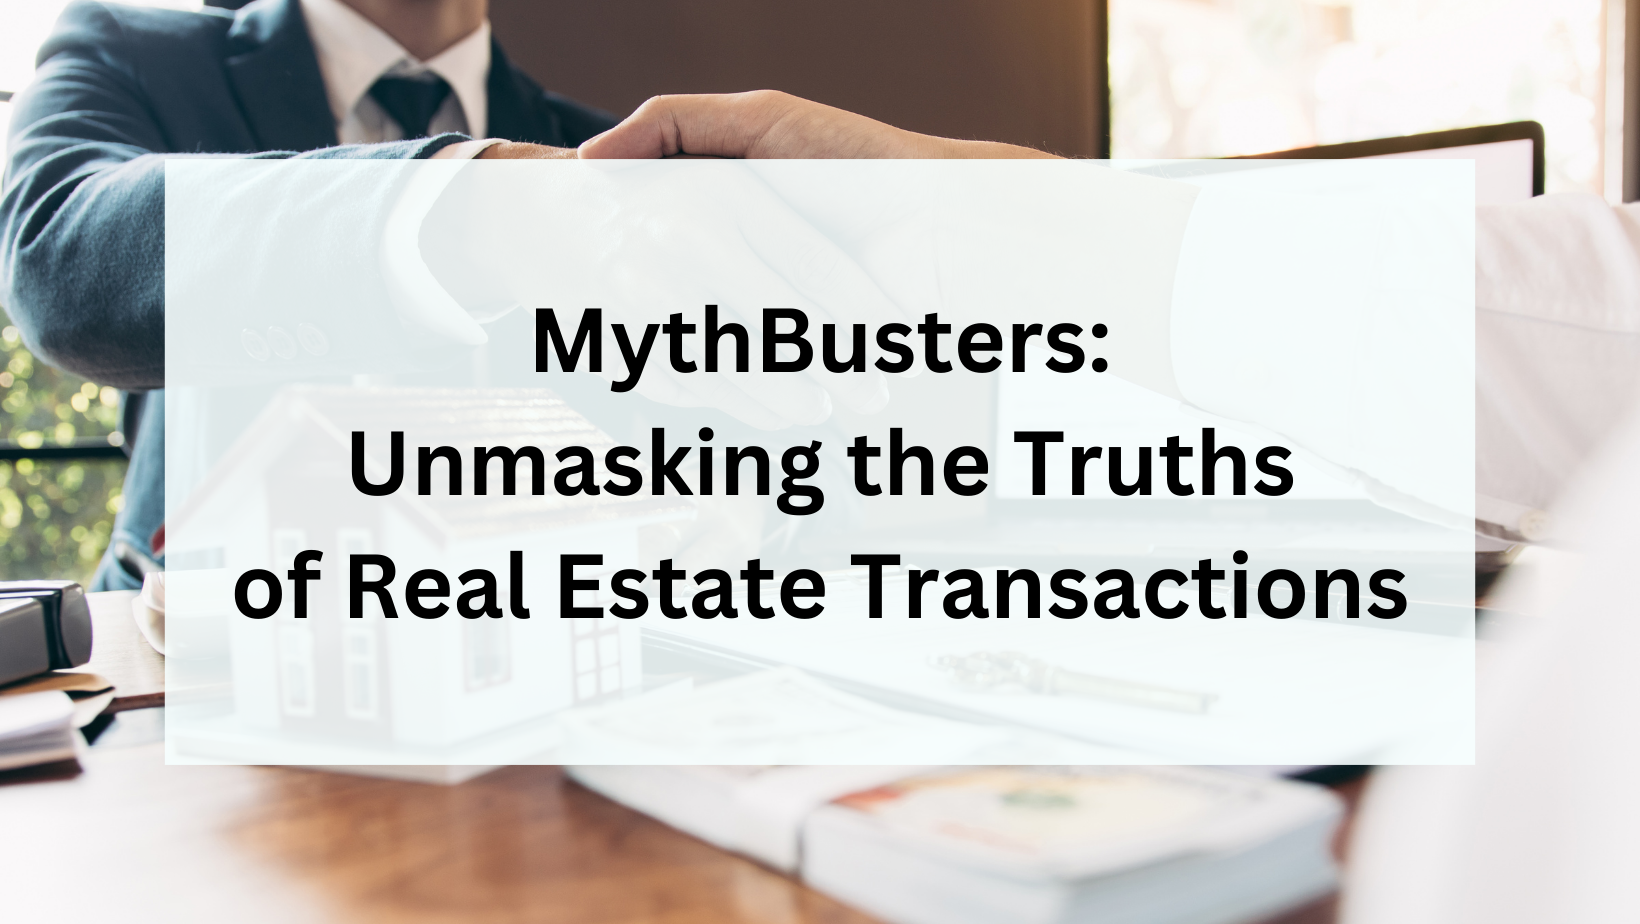 MythBusters: Unmasking the Truths of Real Estate Transactions